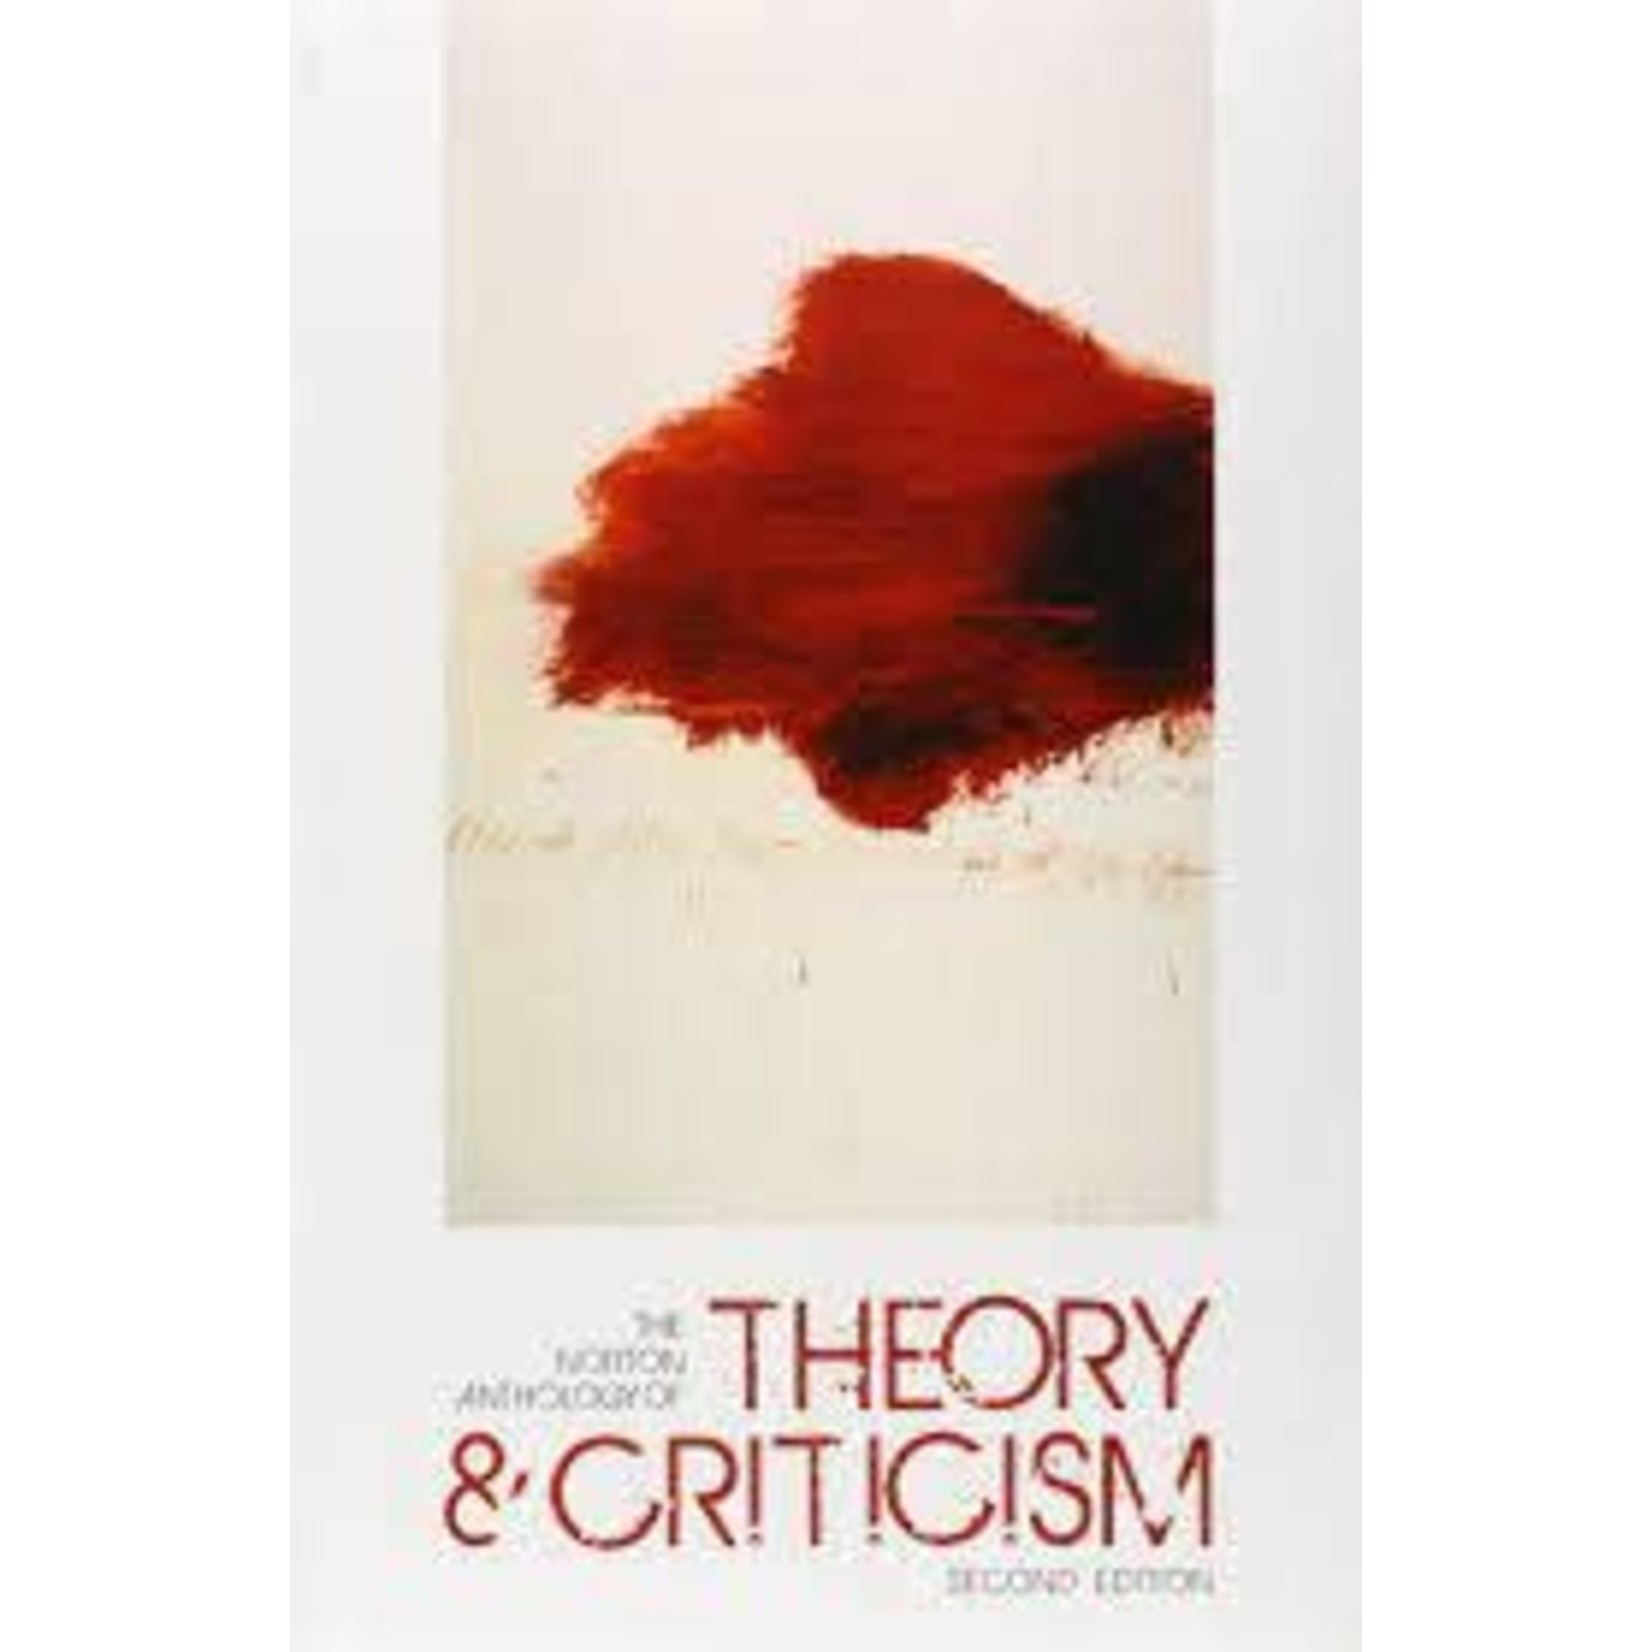 Norton Anthology of Theory and Criticism USED